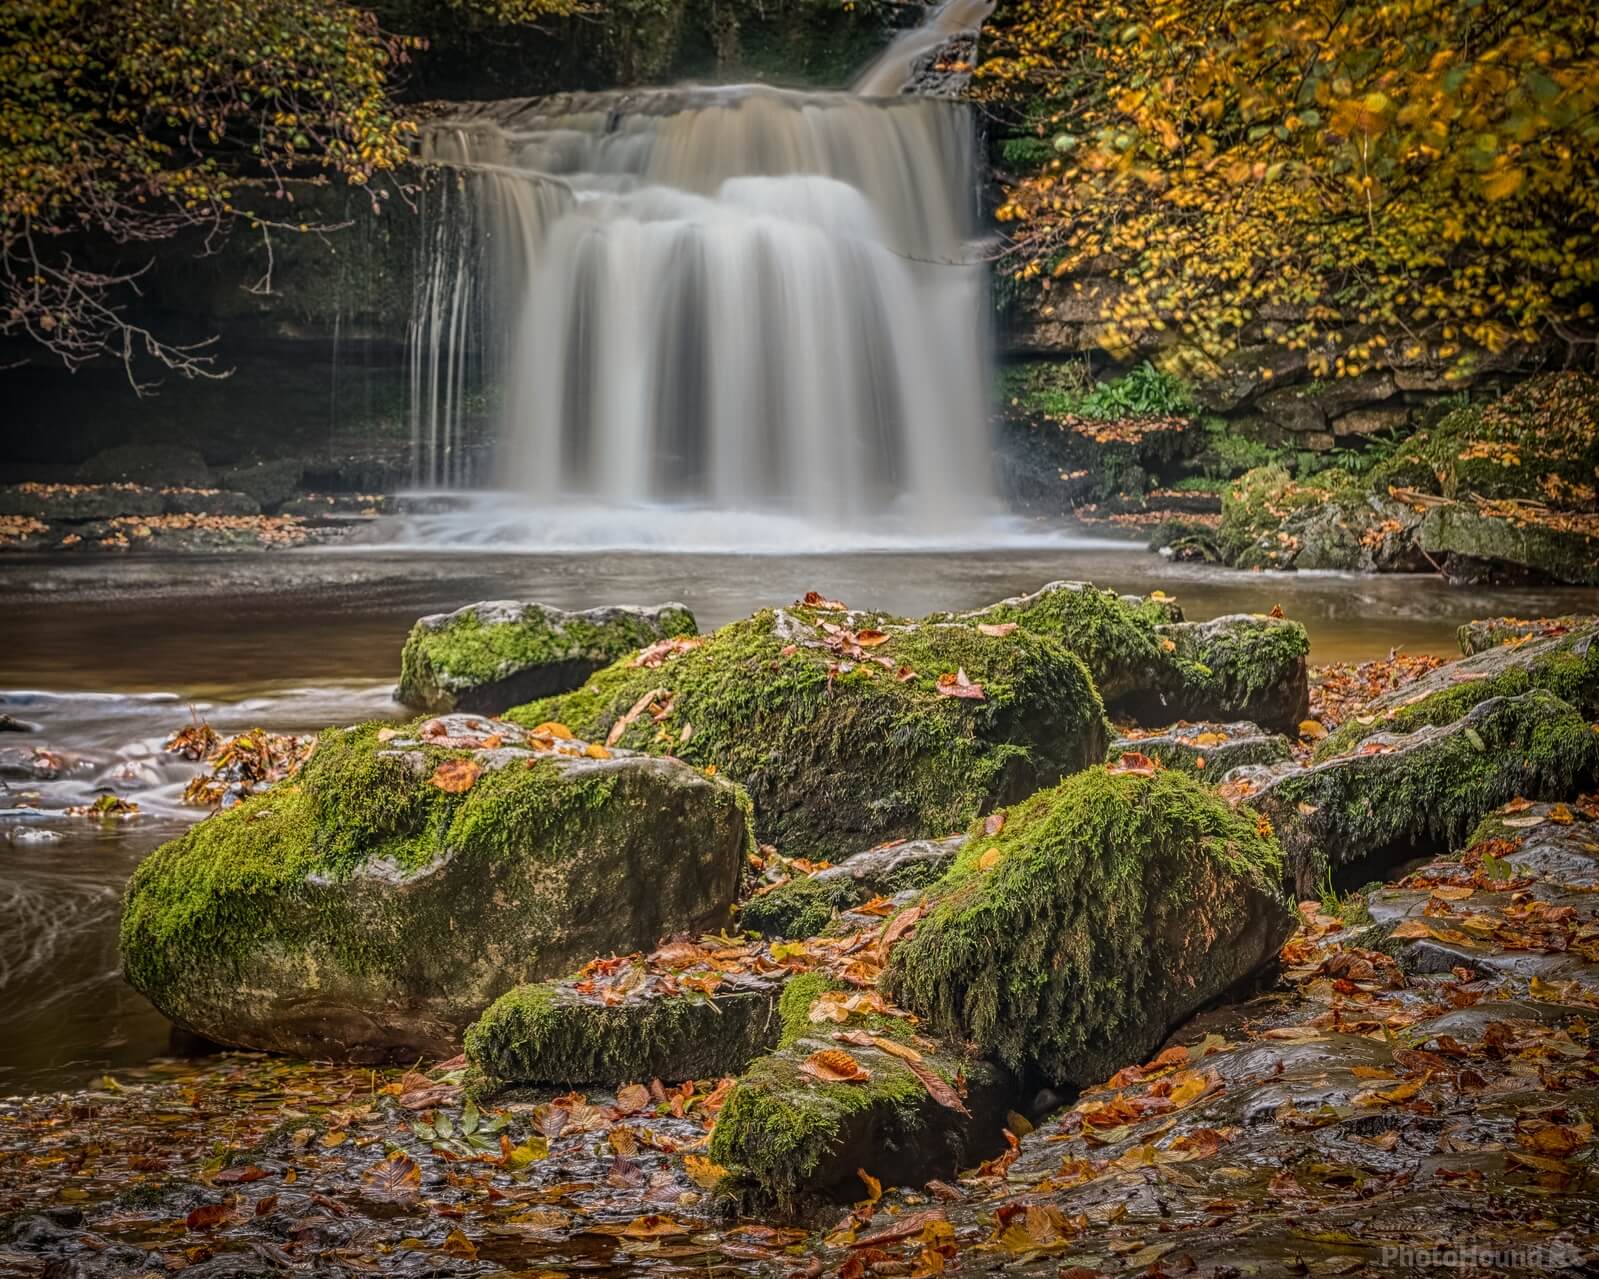 Image of Cauldron Force, West Burton by Andy Killingbeck